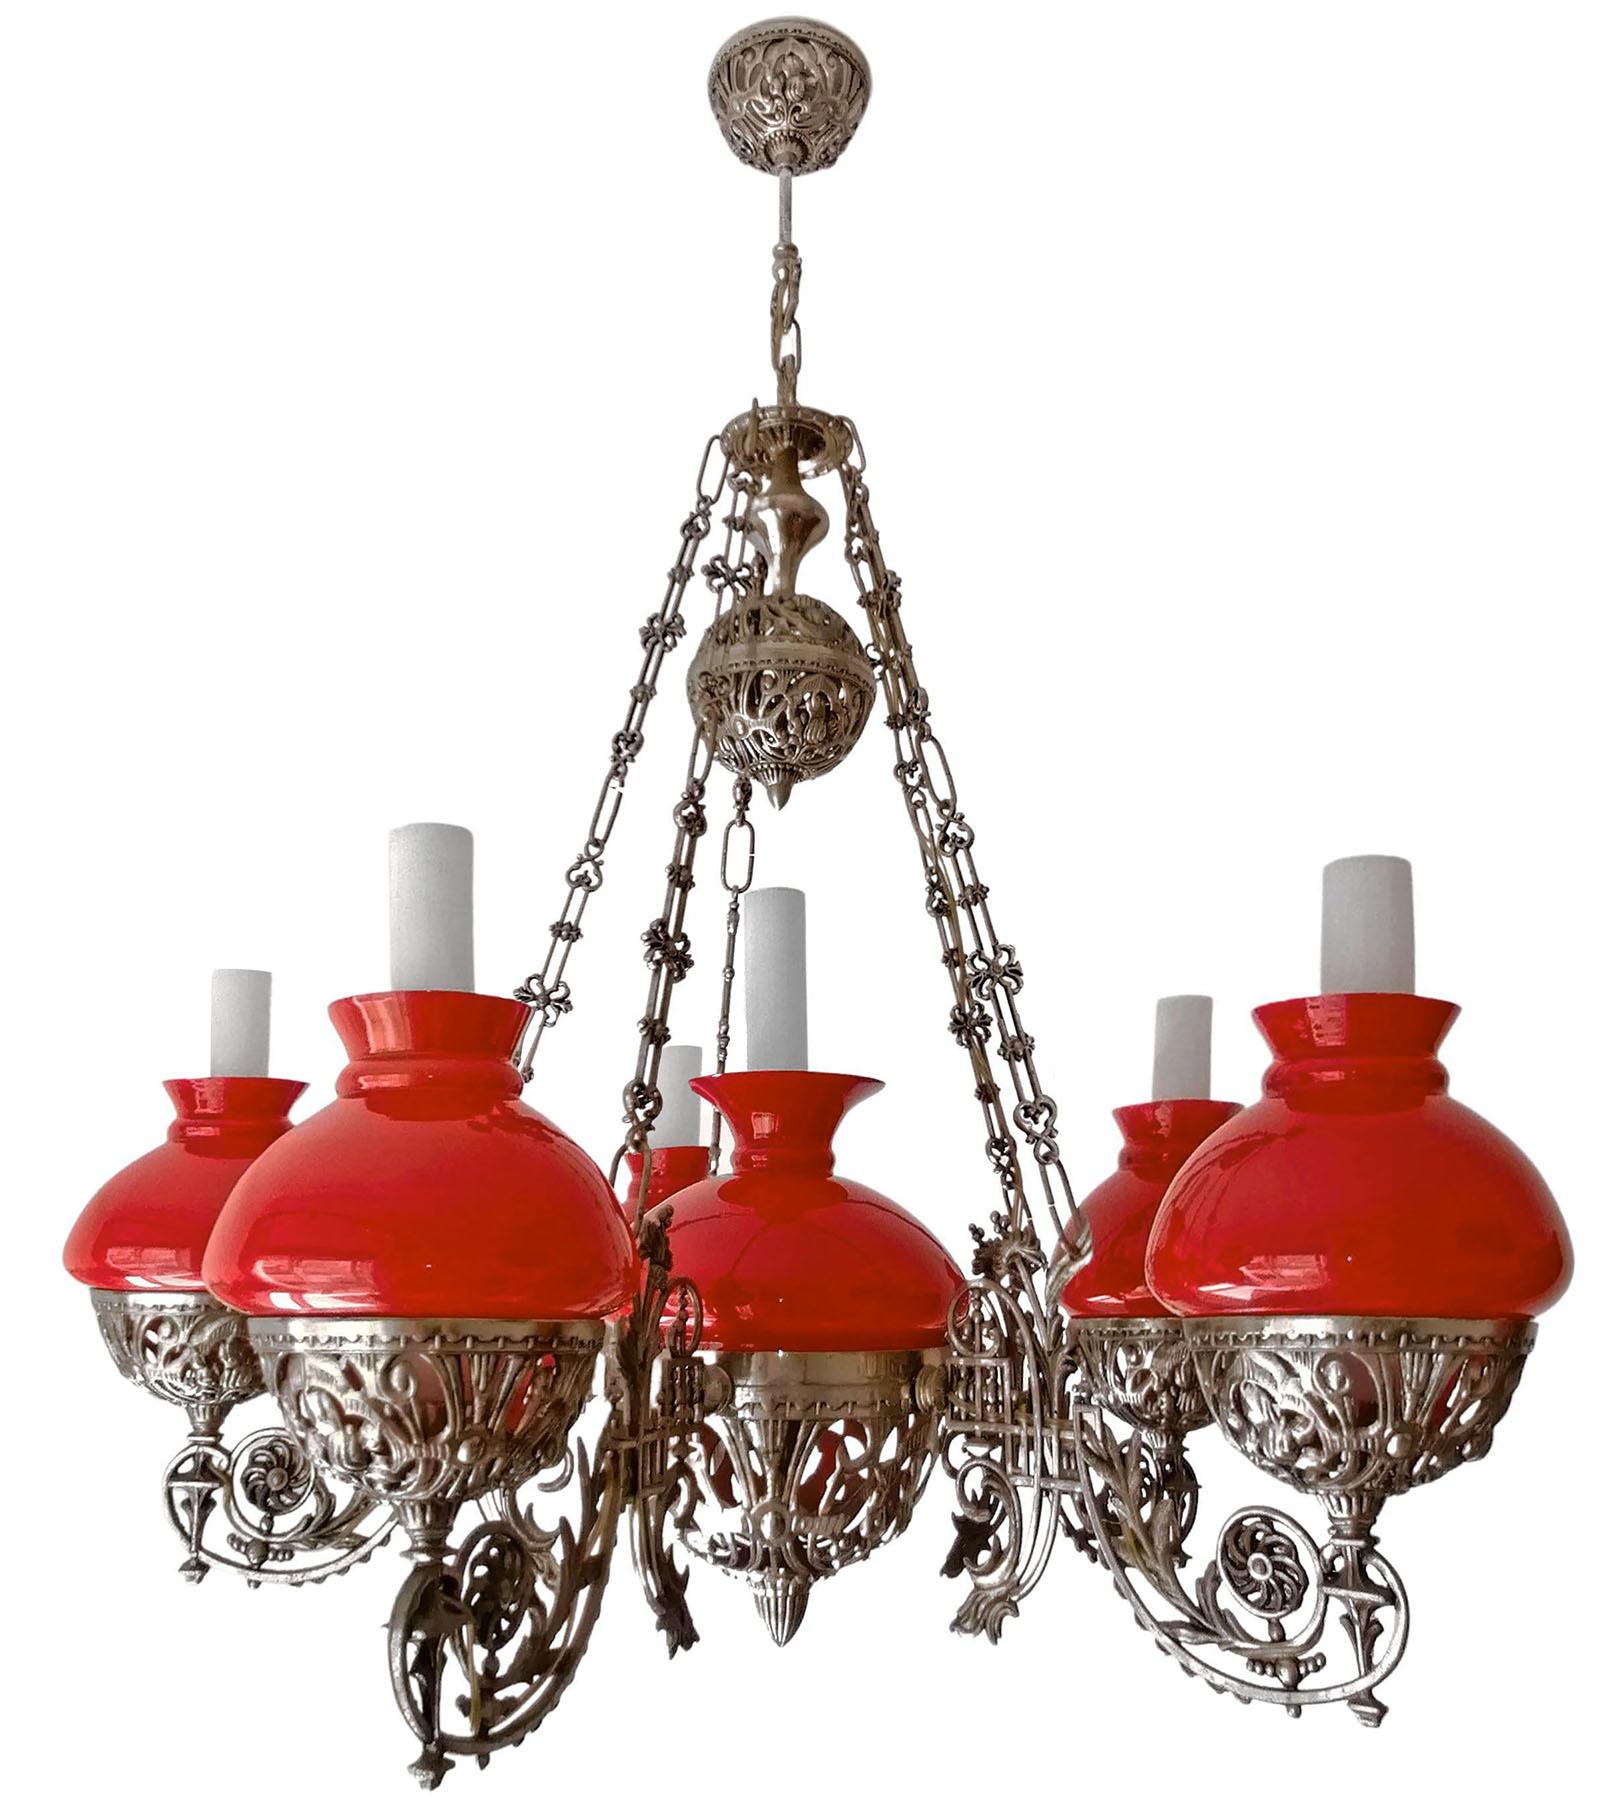 Gorgeous large antique circa 1940 French Victorian 6-light bulbs chandelier with Opaline red cased glass and chiselled ornate nickel. Large opaline center bowl.
Dimensions
Height: 41.34 in. (105 cm)
Diameter: 31.5 in. (80 cm)
6 light bulbs e 14